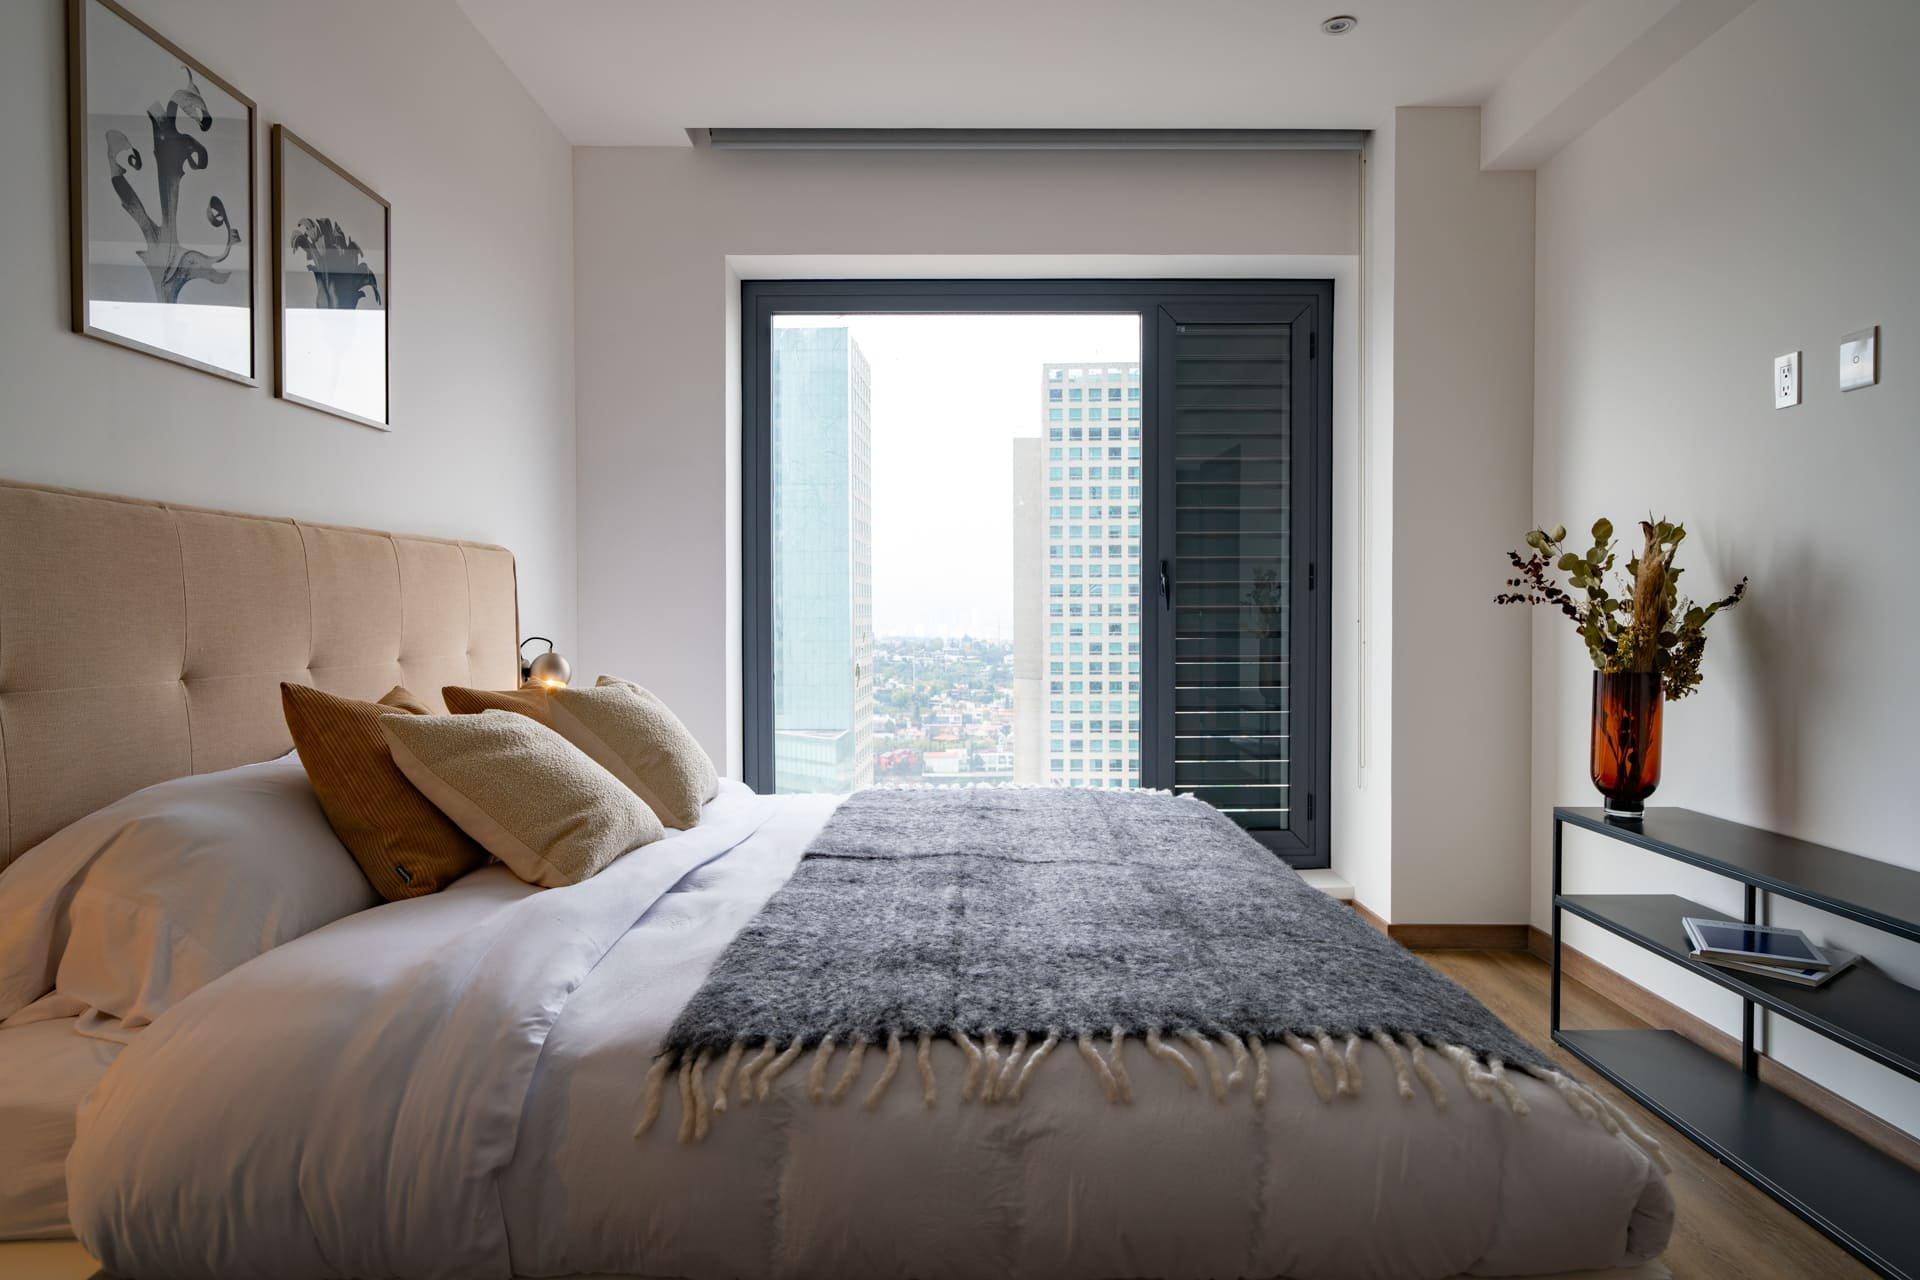 Modern bedroom with plush bedding, city view window, and minimalist decor.